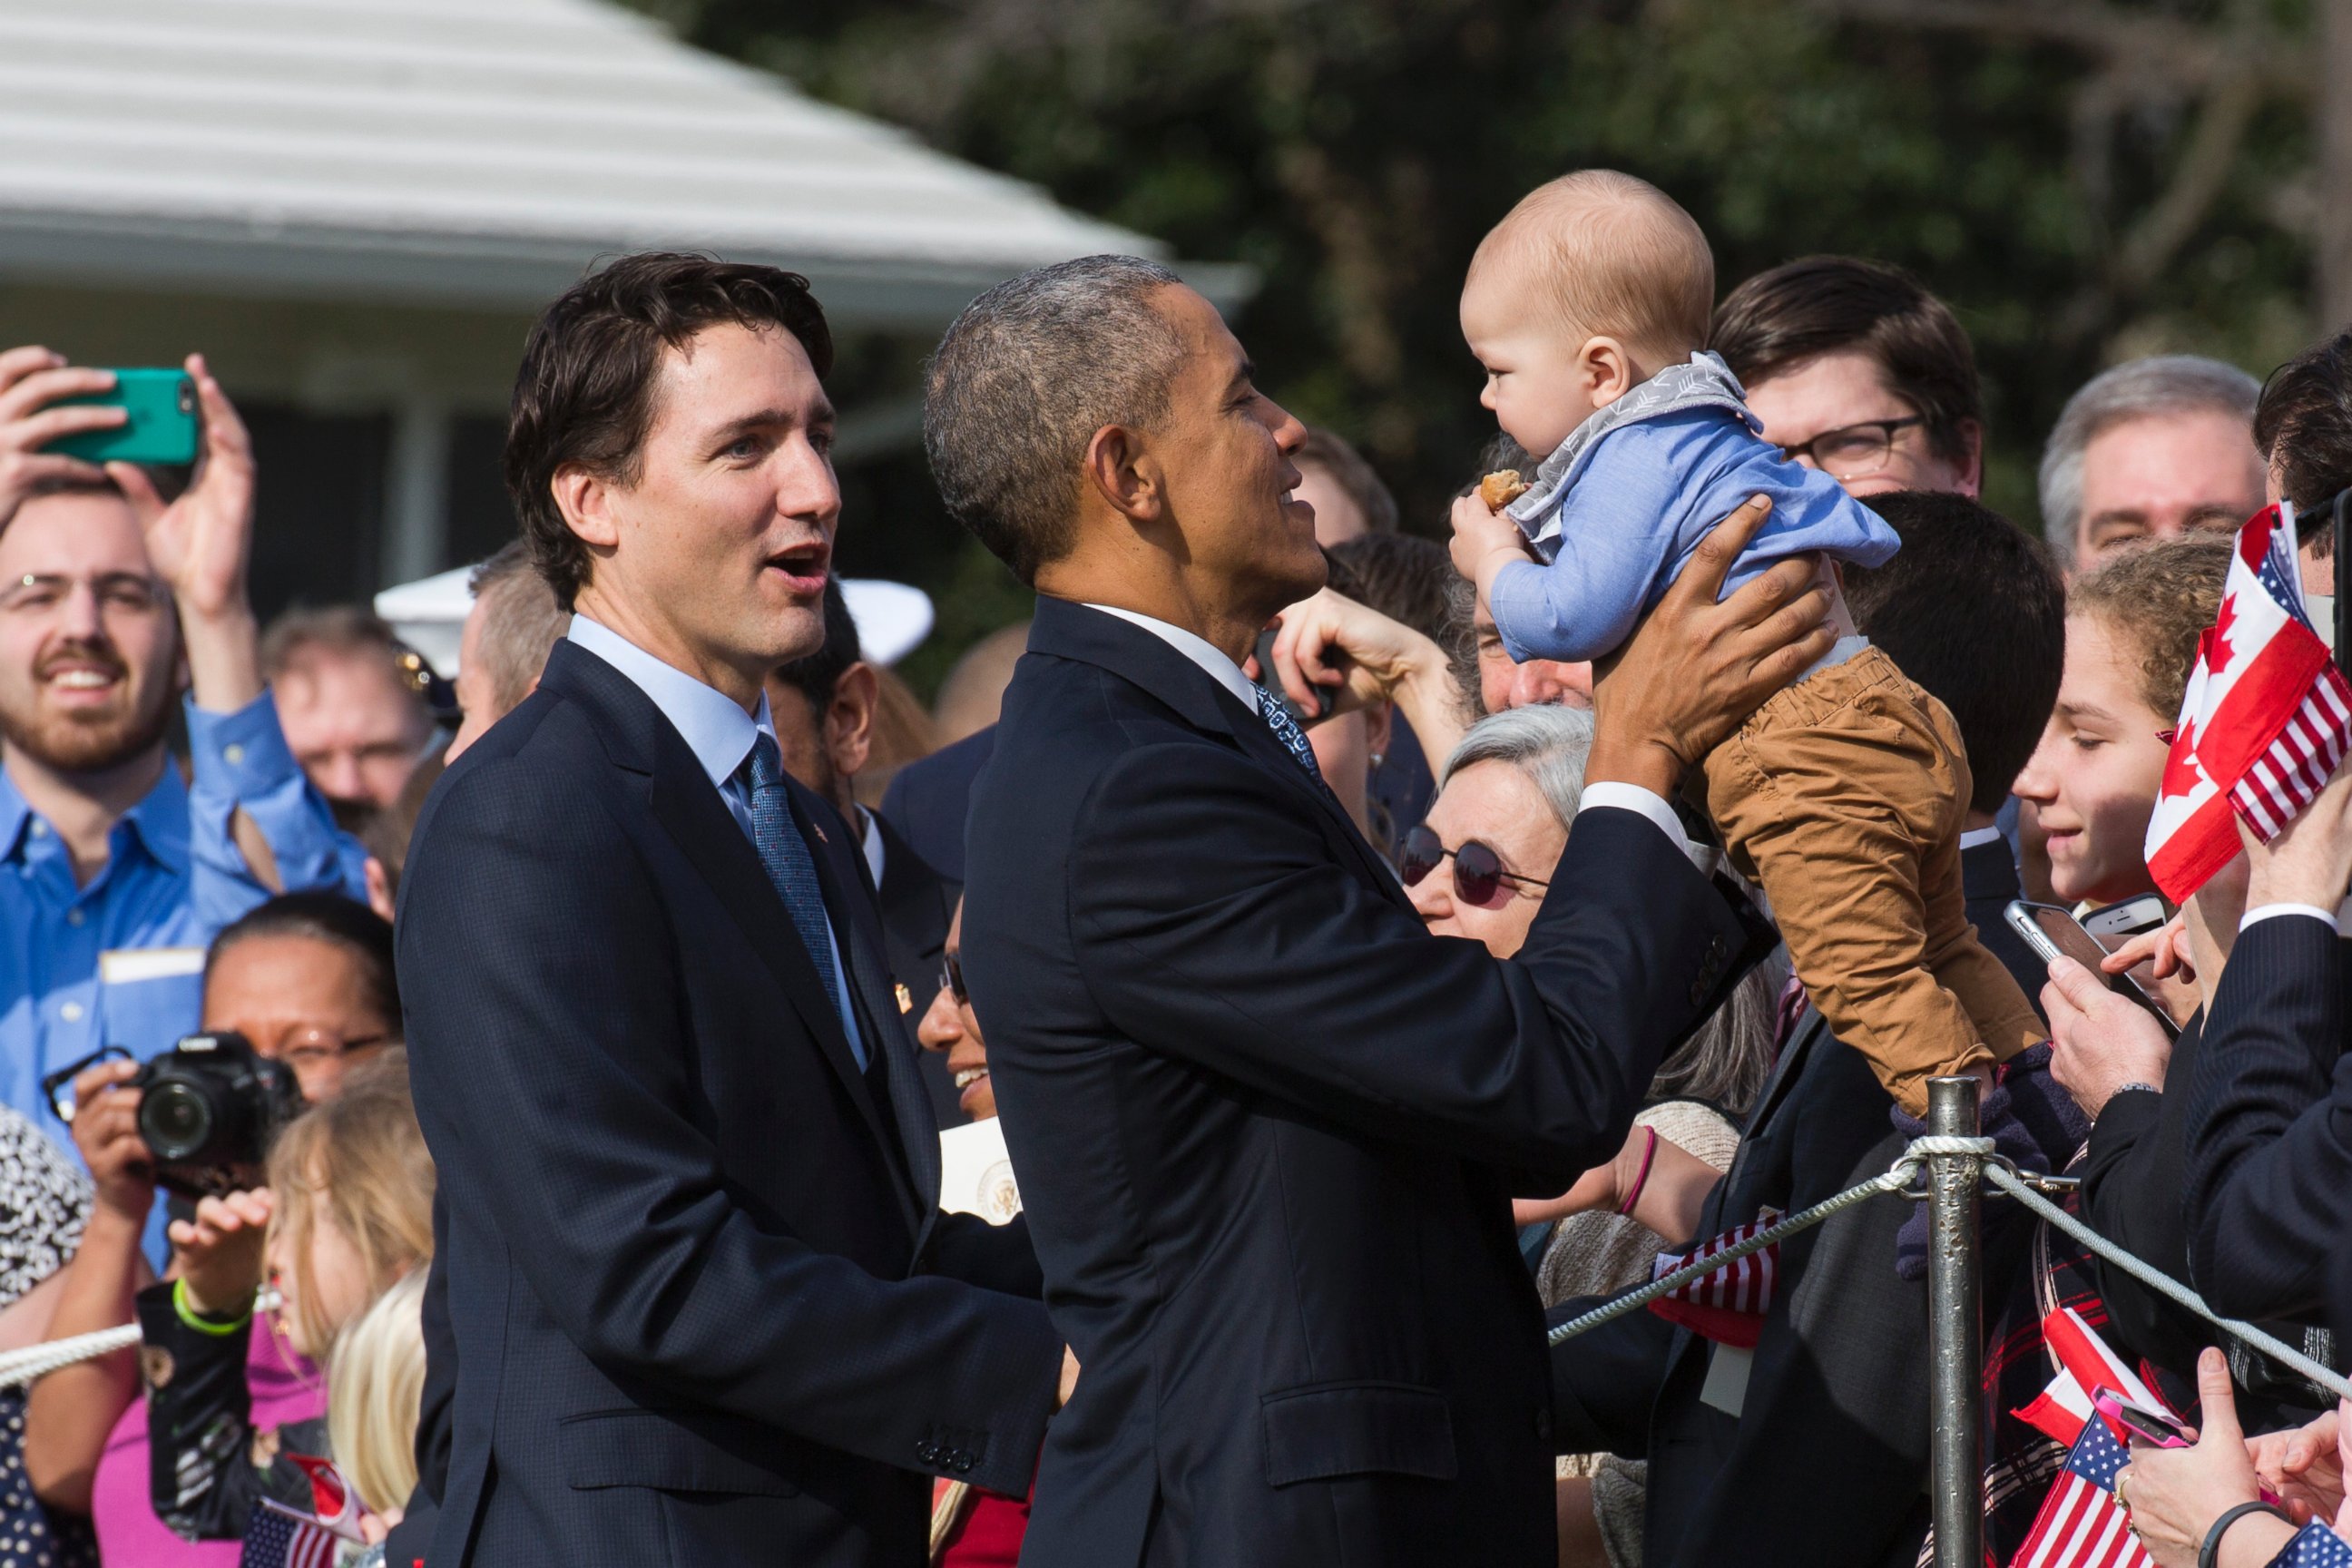 PHOTO: President Barack Obama holds a baby as Canadian Prime Minister Justin Trudeau looks on during an arrival ceremony on the South Lawn of the White House, March 10, 2016 in Washington, D.C.